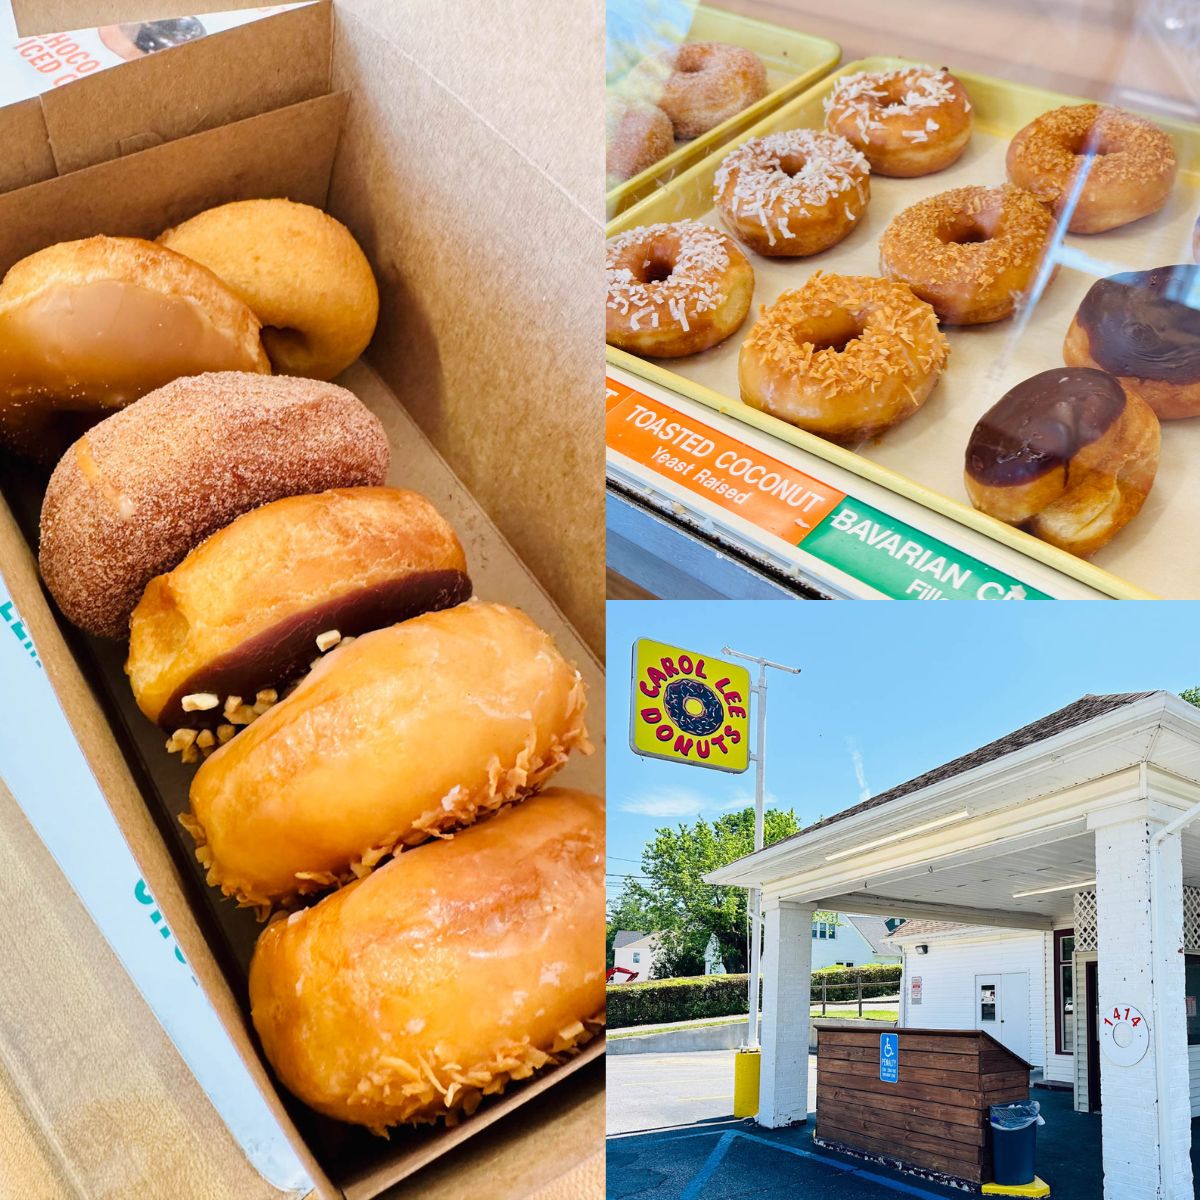 The photo collage shows the donuts and outside of the donut shop.